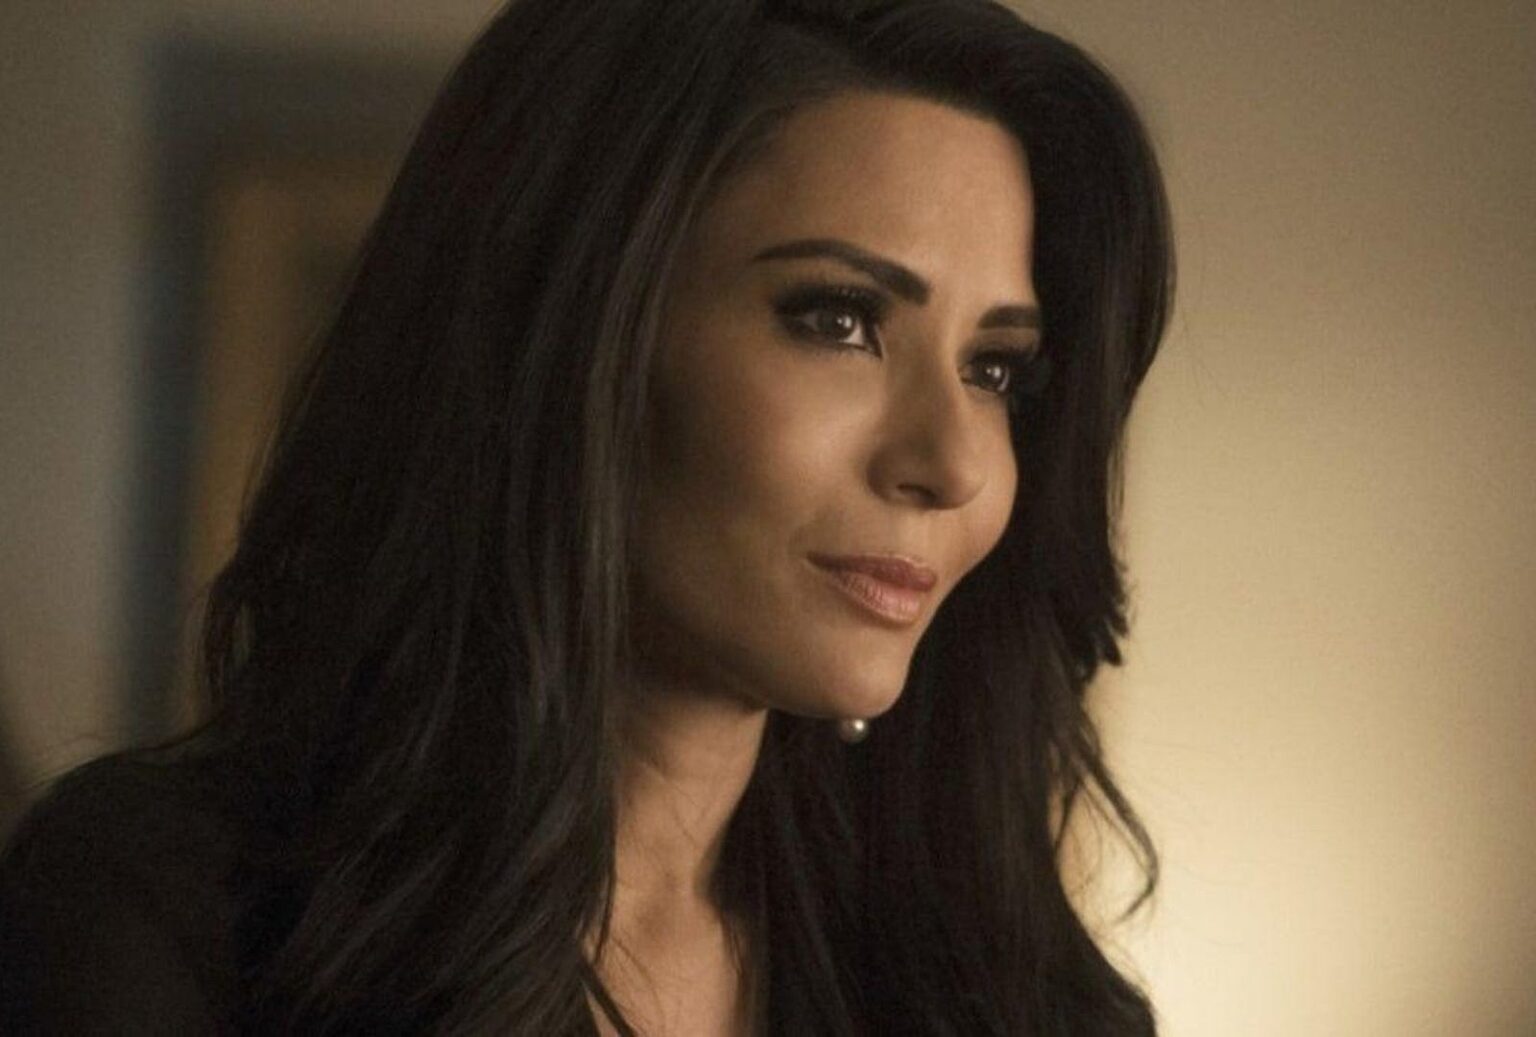 Marisol Nichols, the actress who has played Hermione Lodge on 'Riverdale' has been working as an undercover agent with the FBI. Here's what we know.